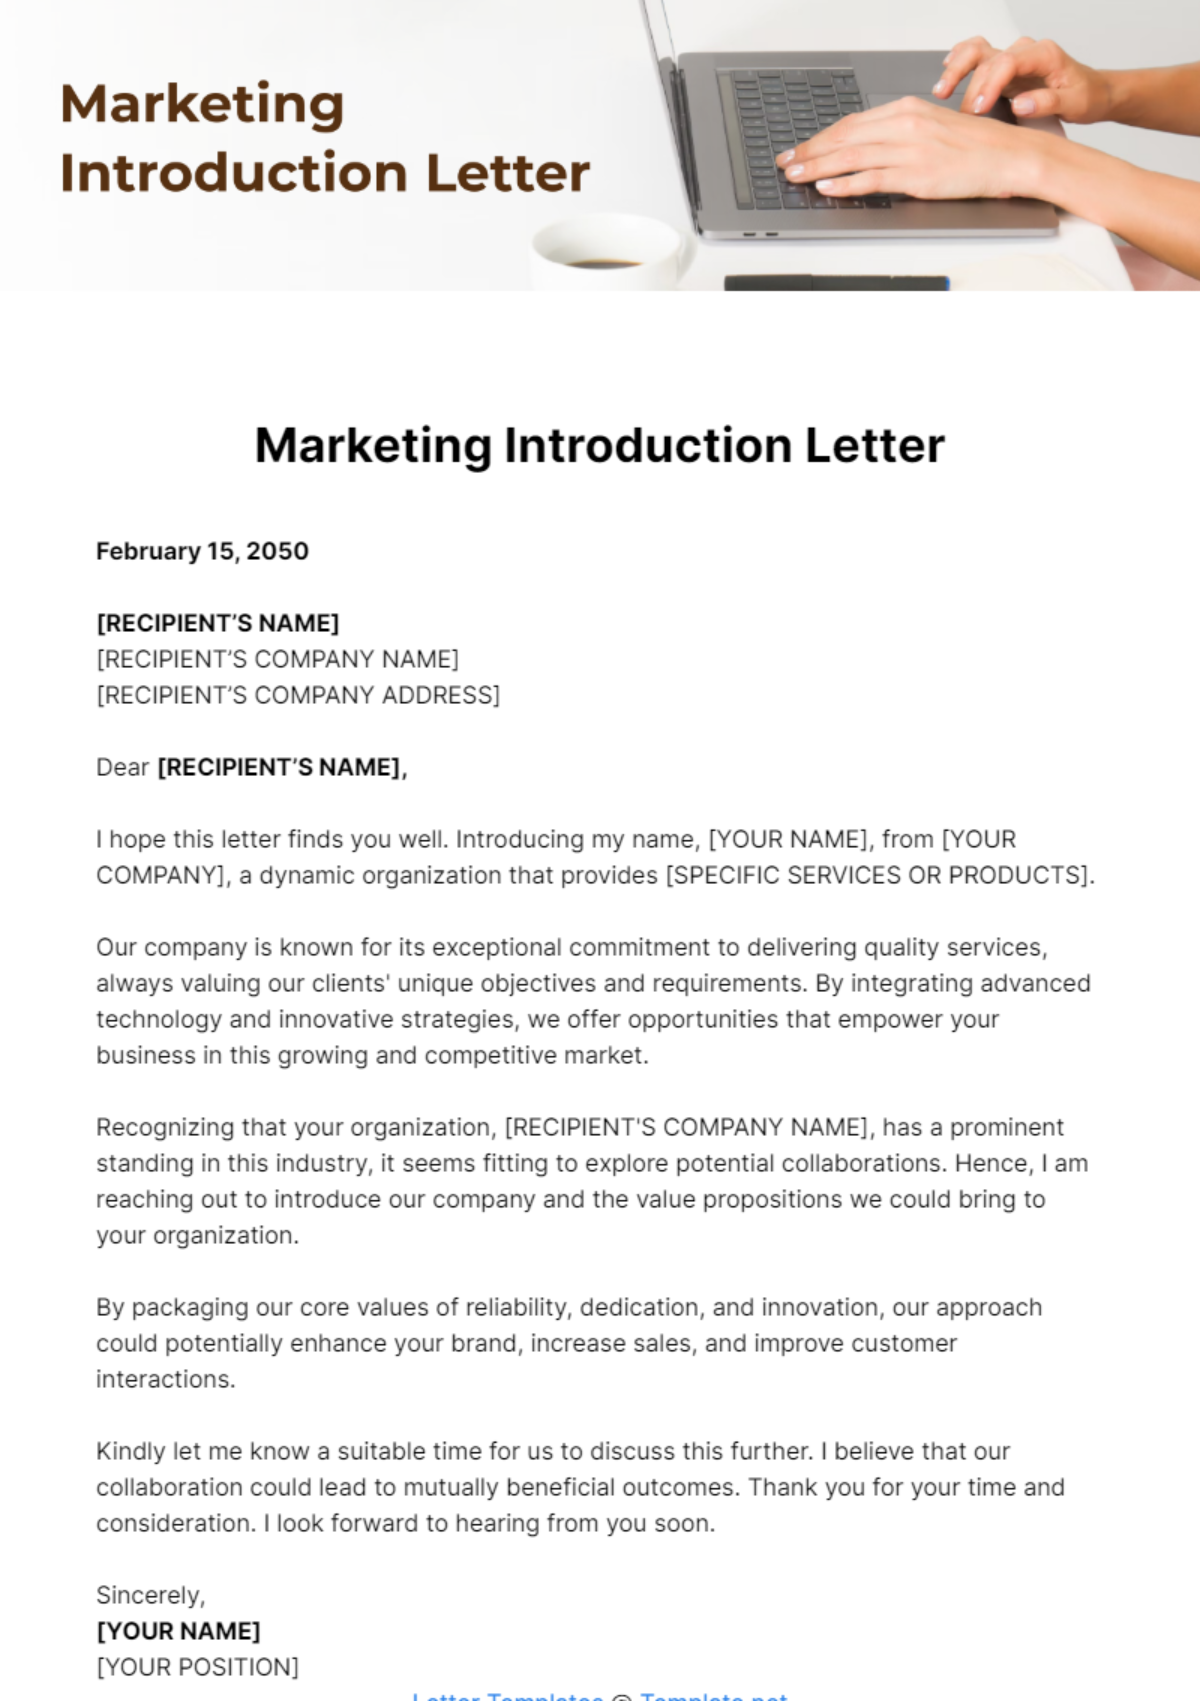 Free Marketing Introduction Letter Template